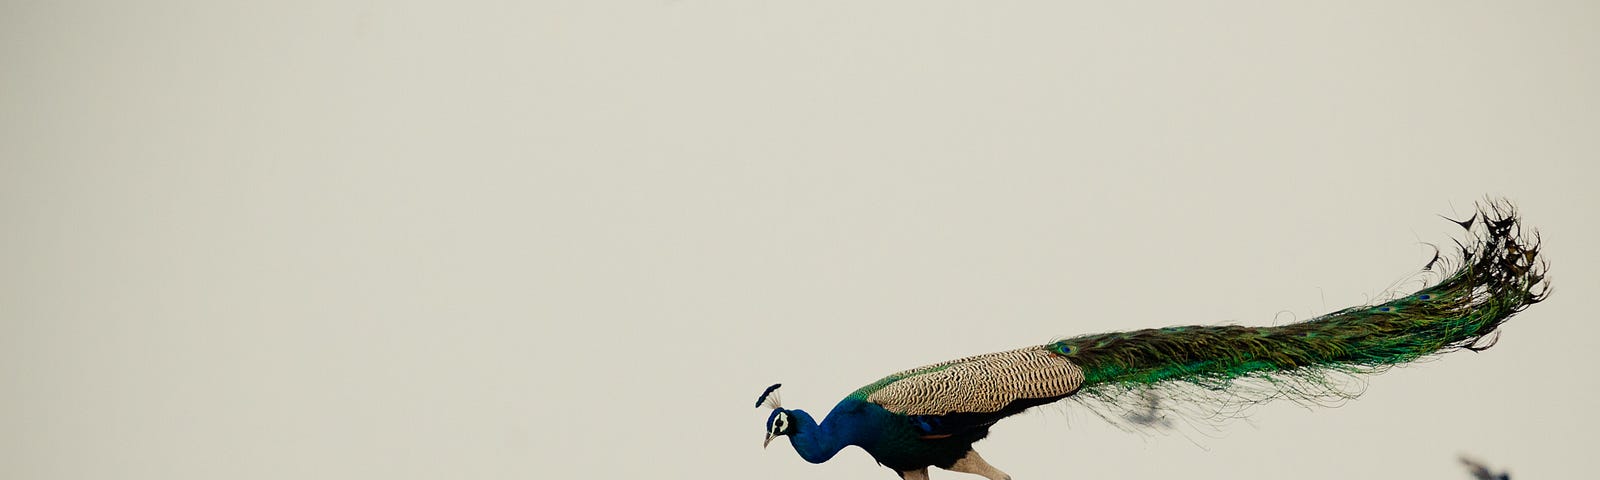 Peacock Jumping over Brown Concrete Wall